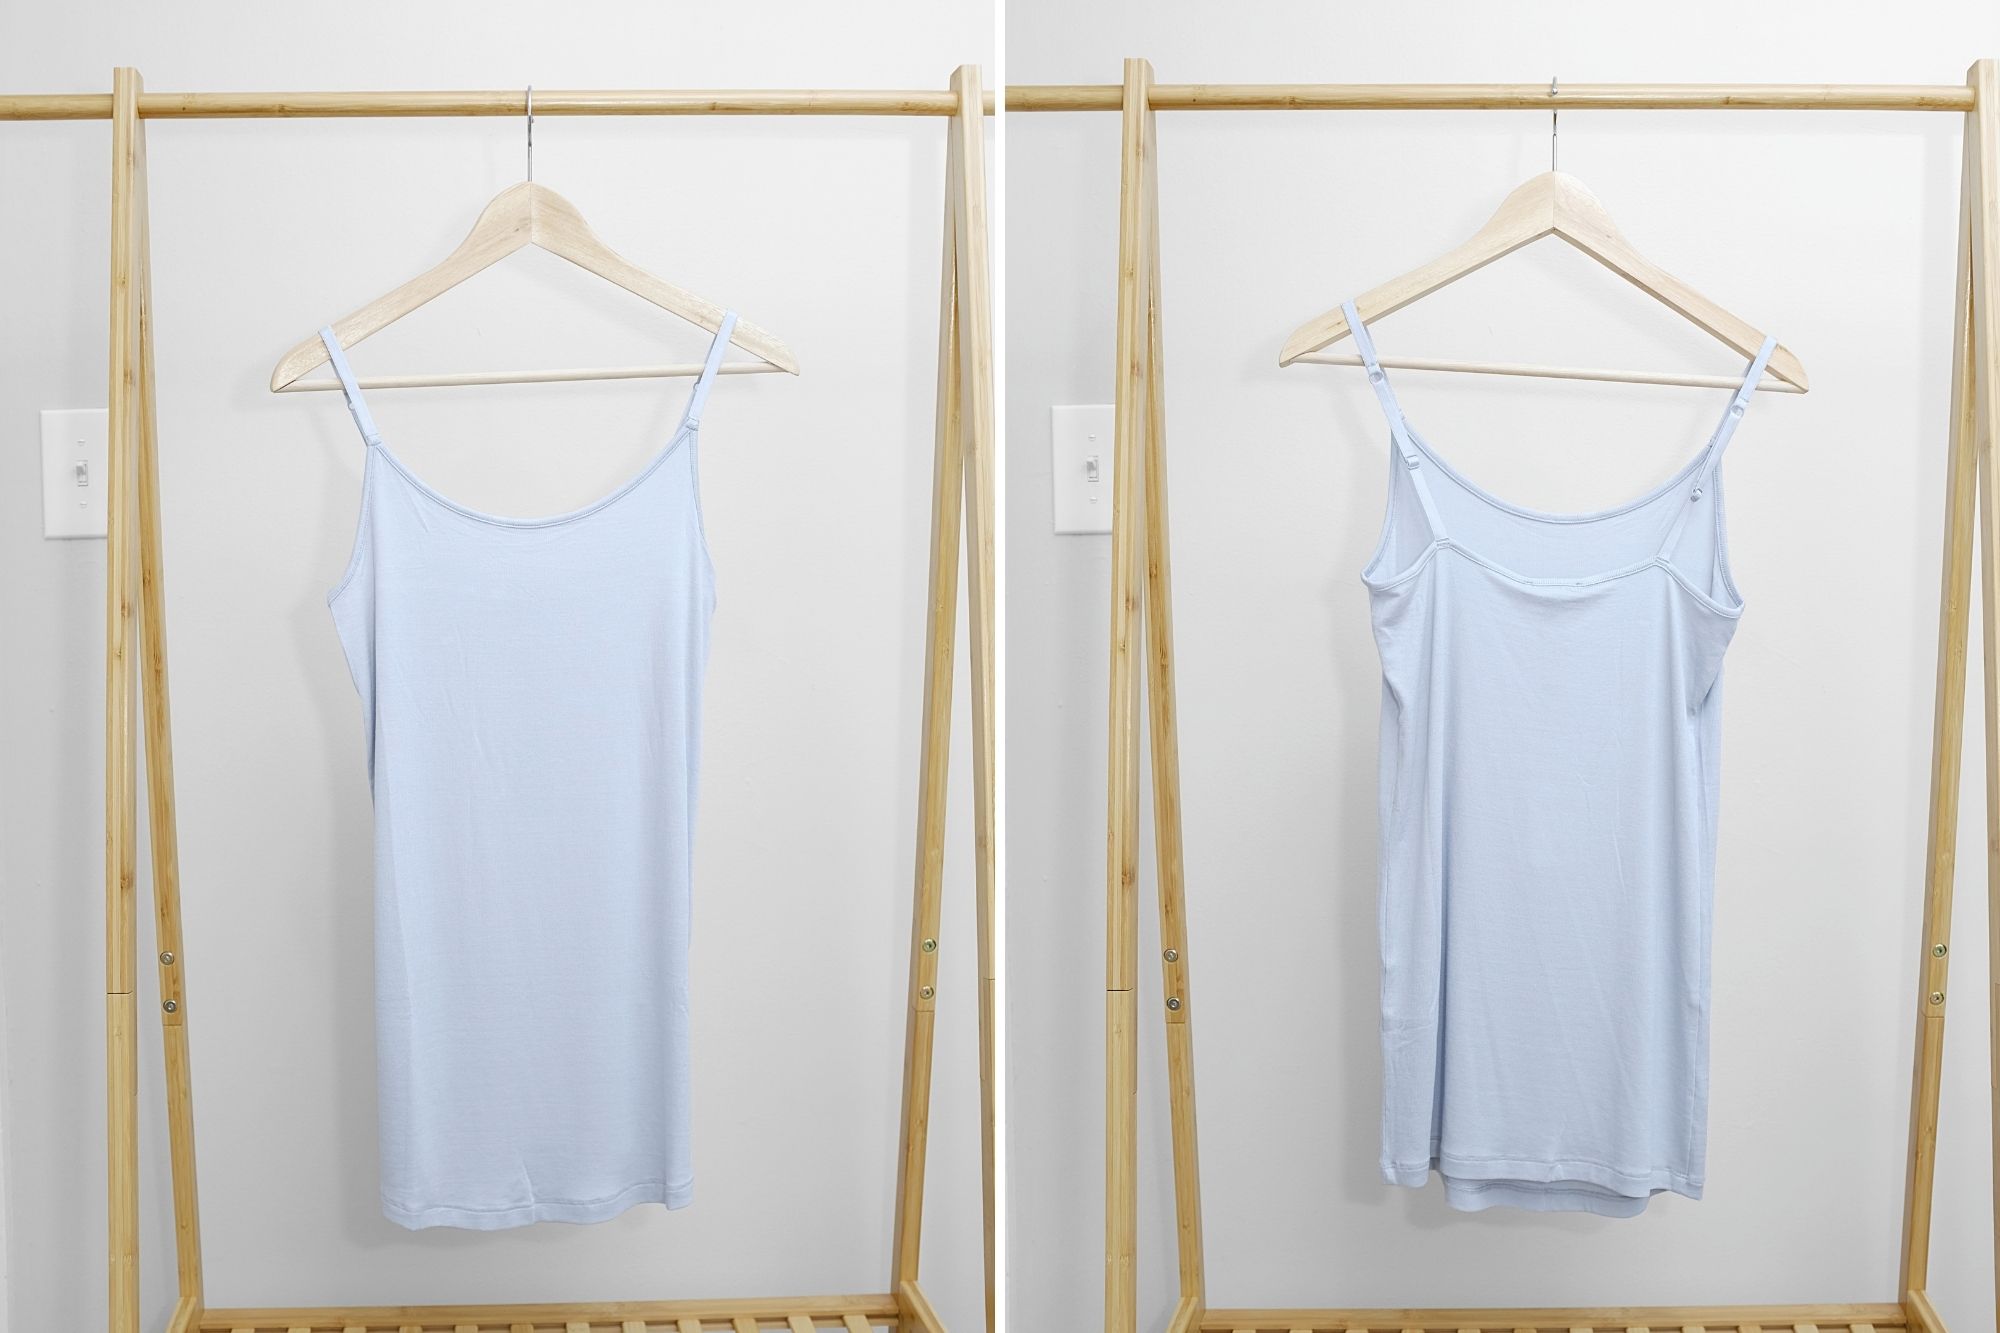 The Foundation Camisole hangs on a hanger, front and back